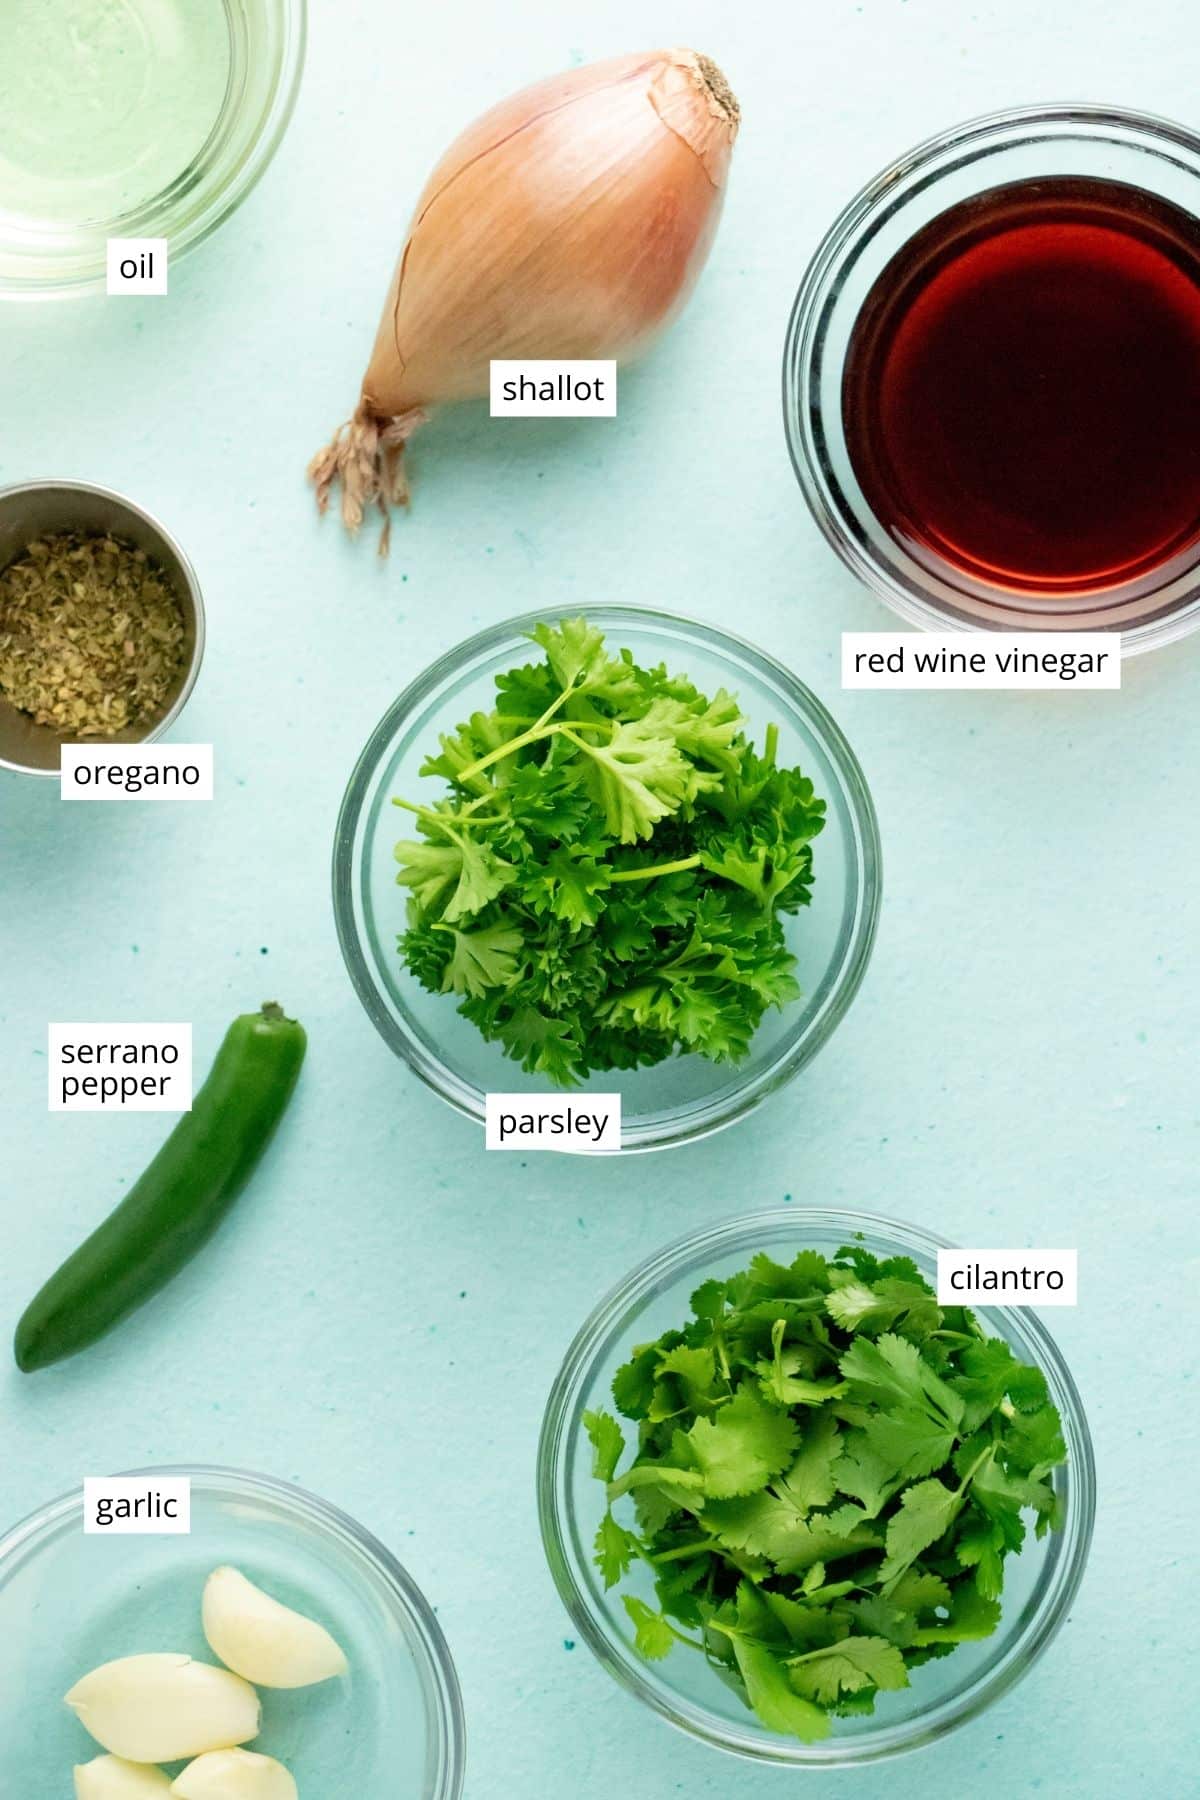 cilantro, parsley, and other chimichurri ingredients in bowls on a blue table